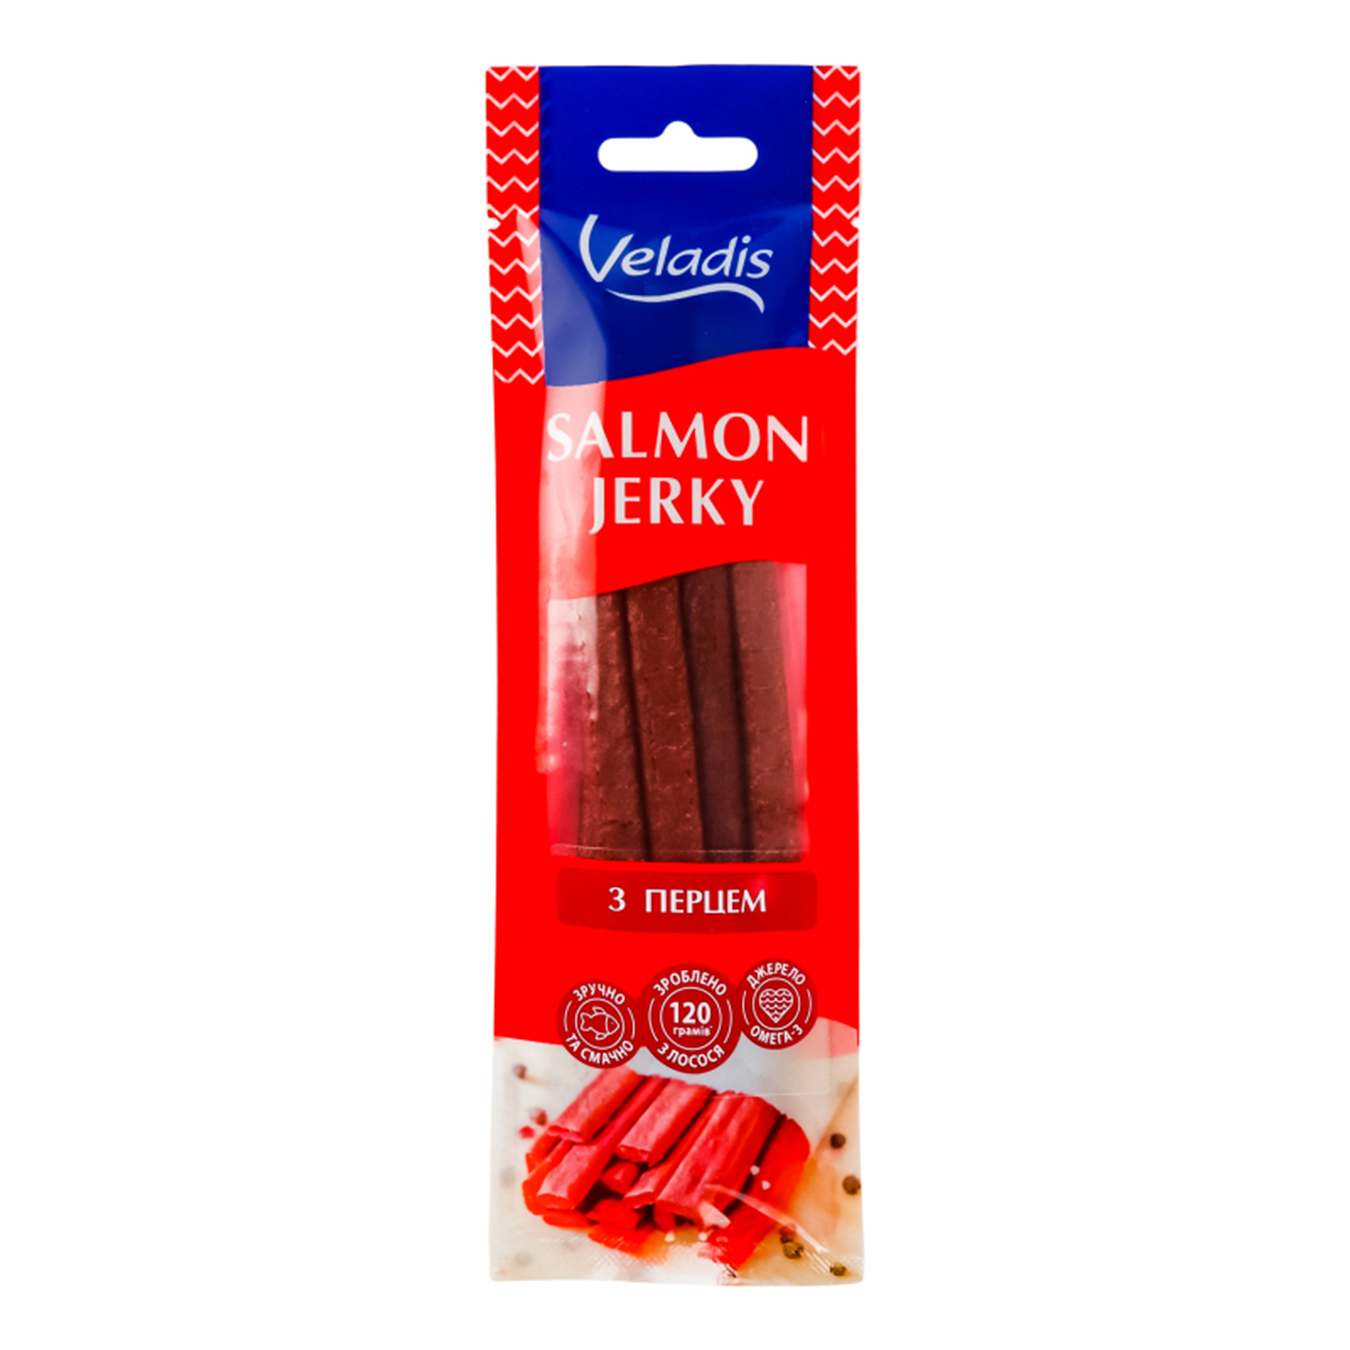 Sticks dried Veladis from salmon with pepper 40g